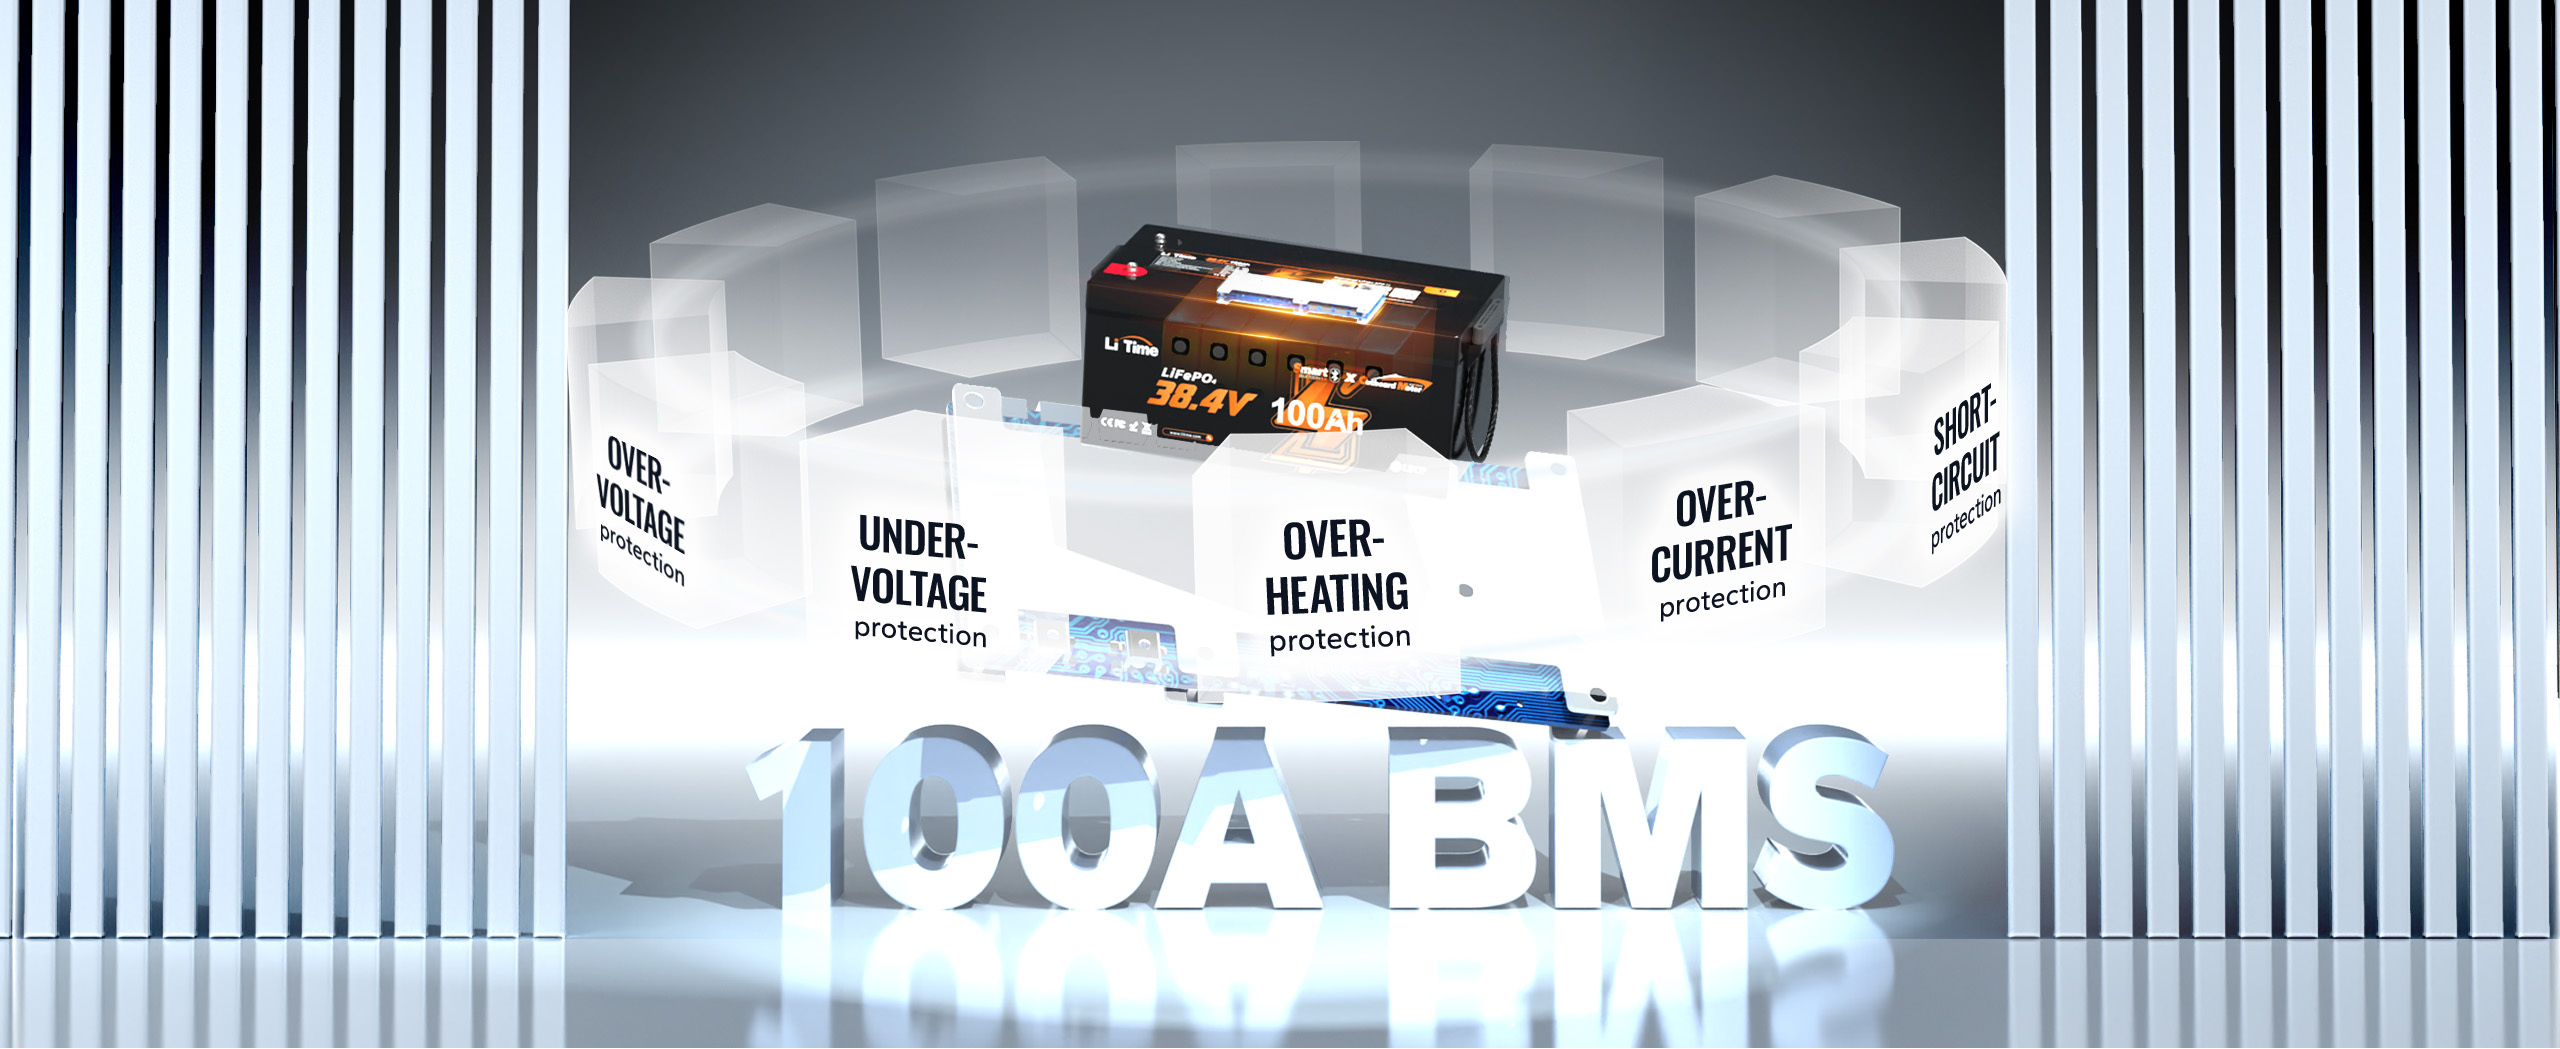 LiTime lithium marine battery with 100A BMS